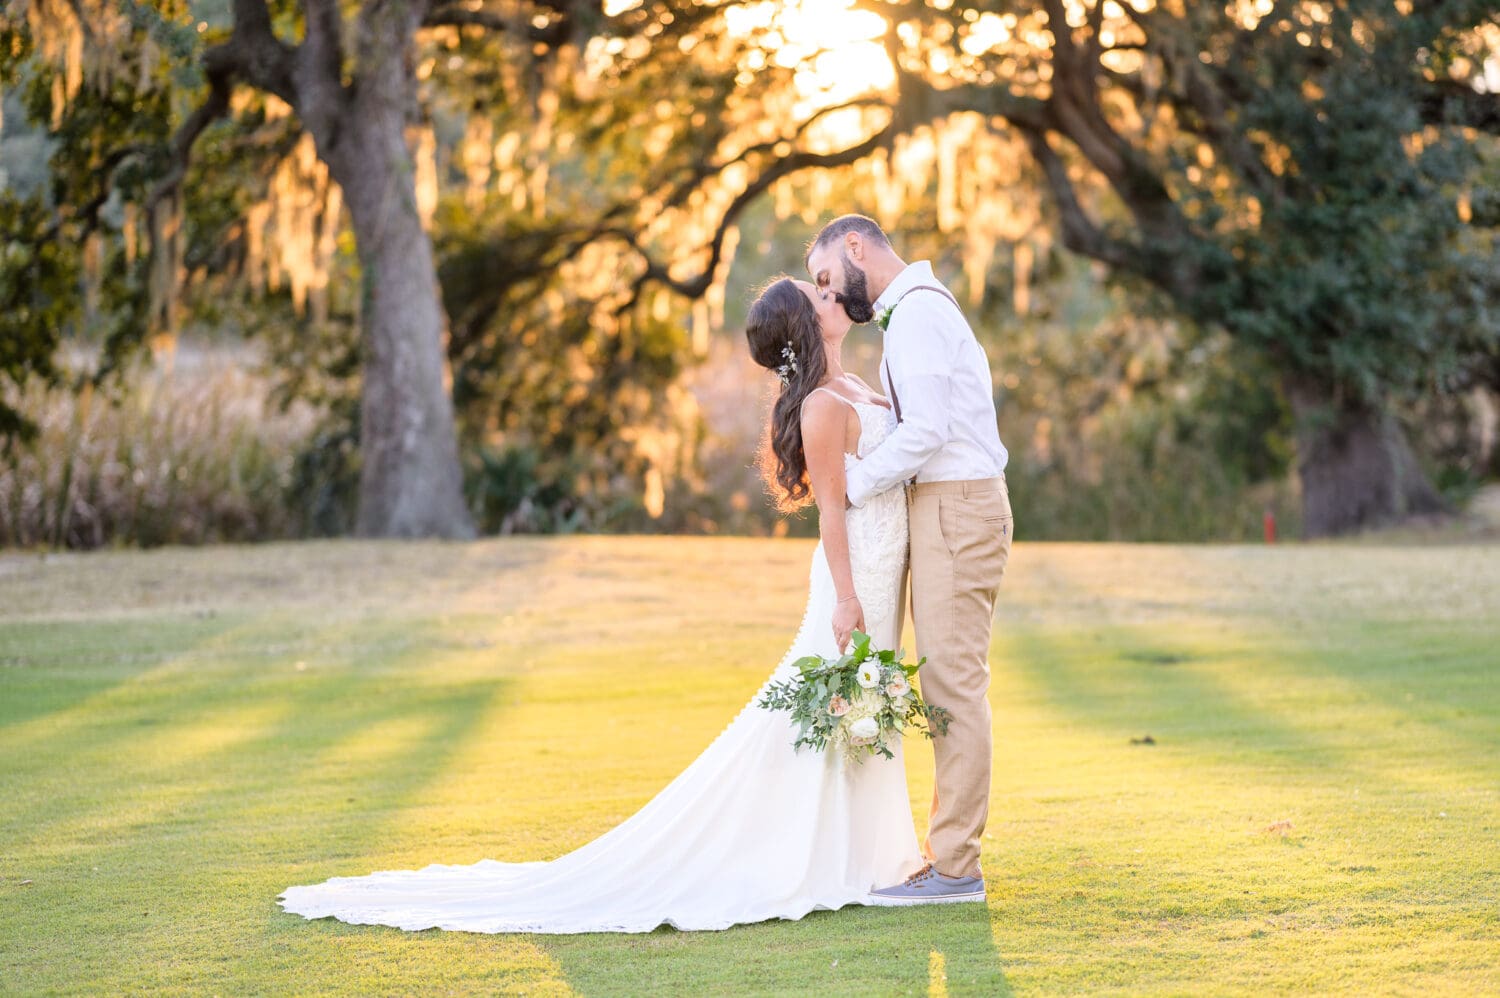 Kiss with moss and sunset in the background - Pawleys Plantation